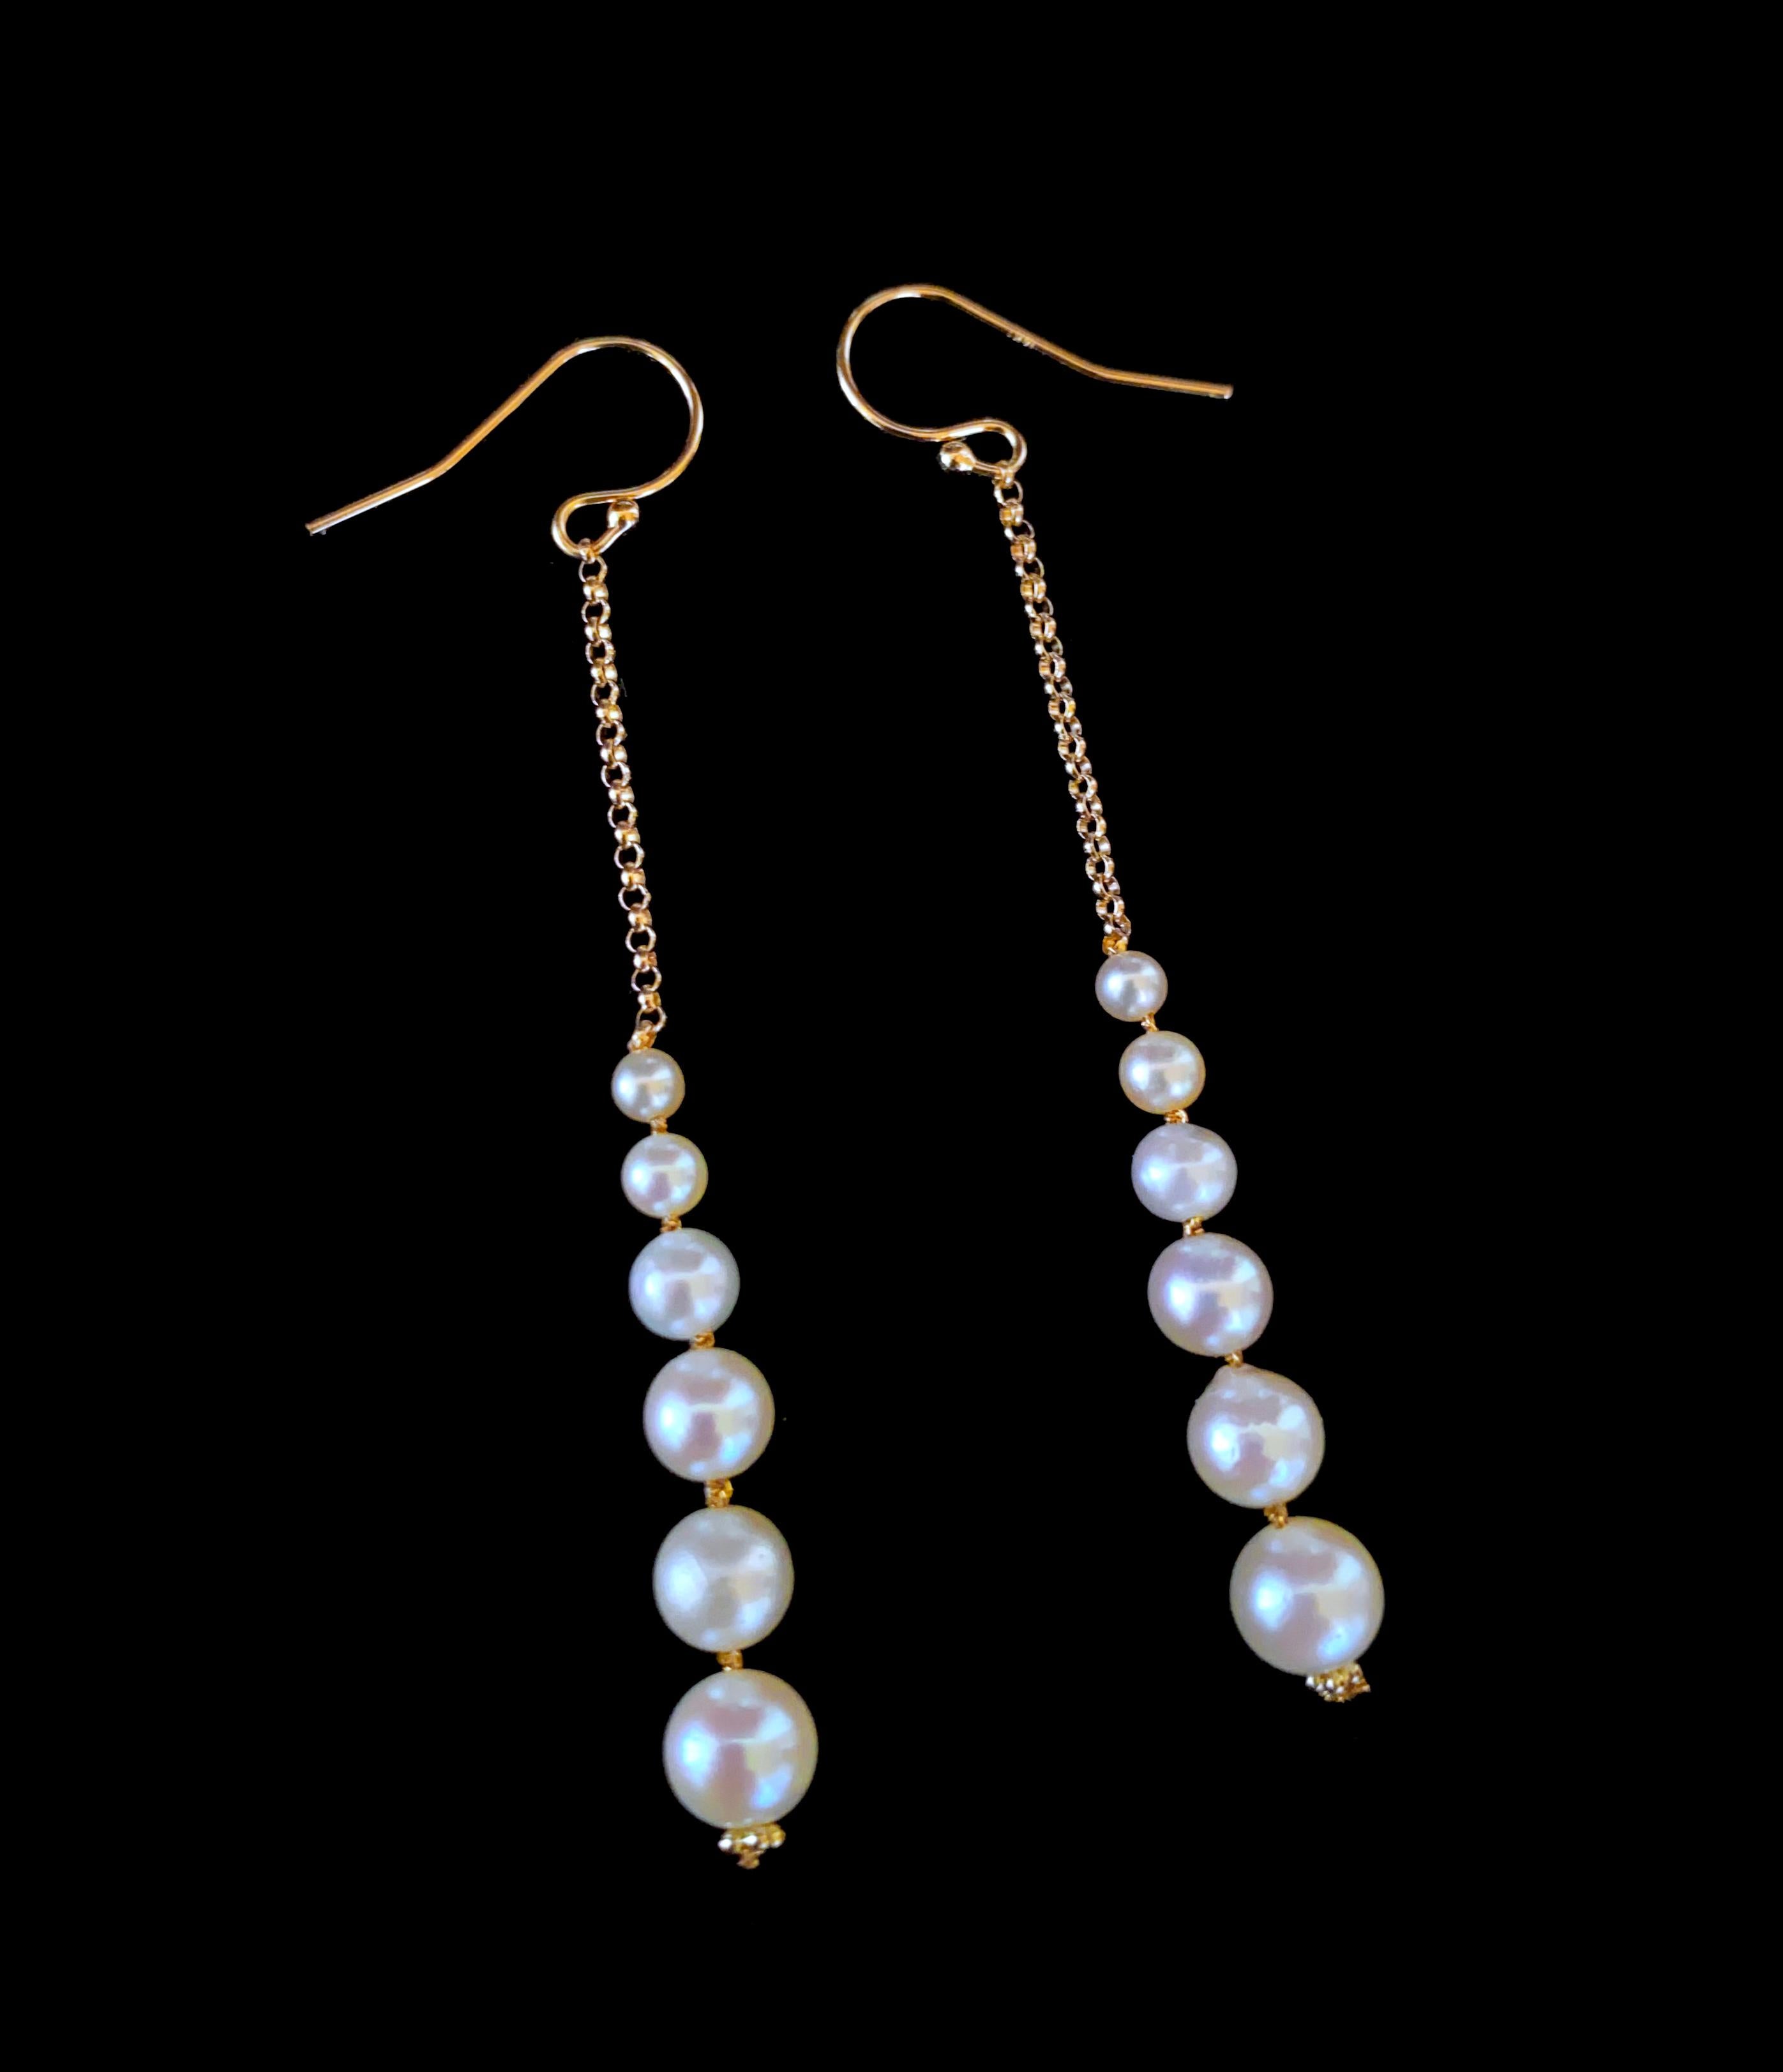 Simple and classy pair of Earrings by Marina J. This lovely pair is made of all solid 14k Yellow Gold chain and hooks. A row of Pearls Graduating in size hang off solid 14k Yellow Gold Chain. The white Pearls display a soft iridescent luster that is